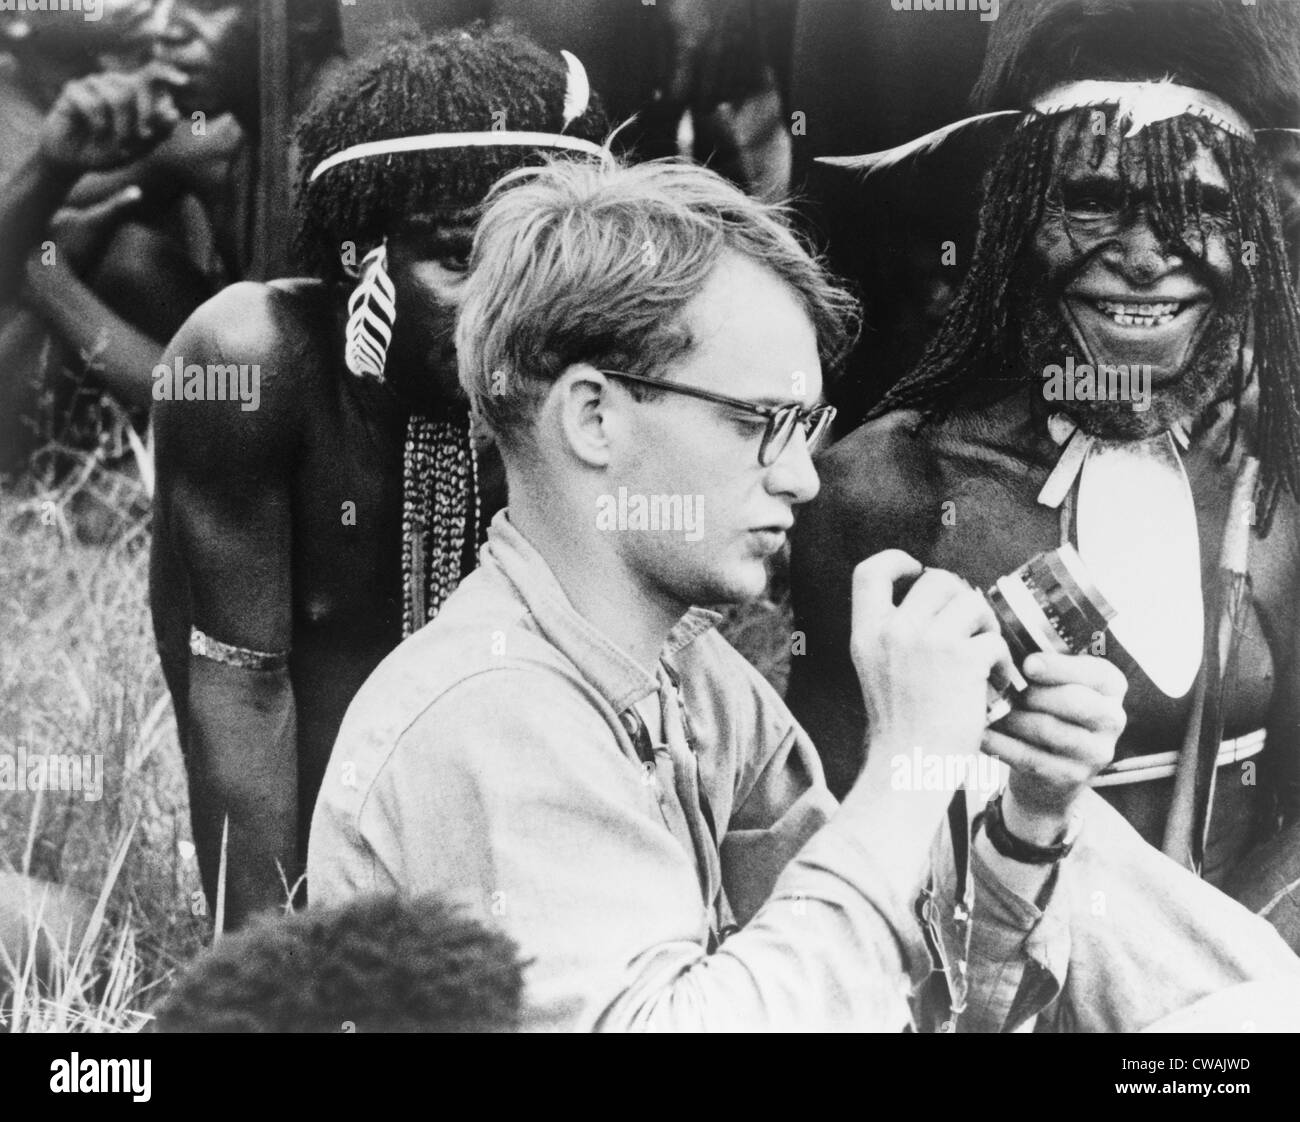 Michael C. Rockefeller (1934-1961) adjusting his camera in New Guinea, Papuan men in background.  He disappeared while swimming Stock Photo